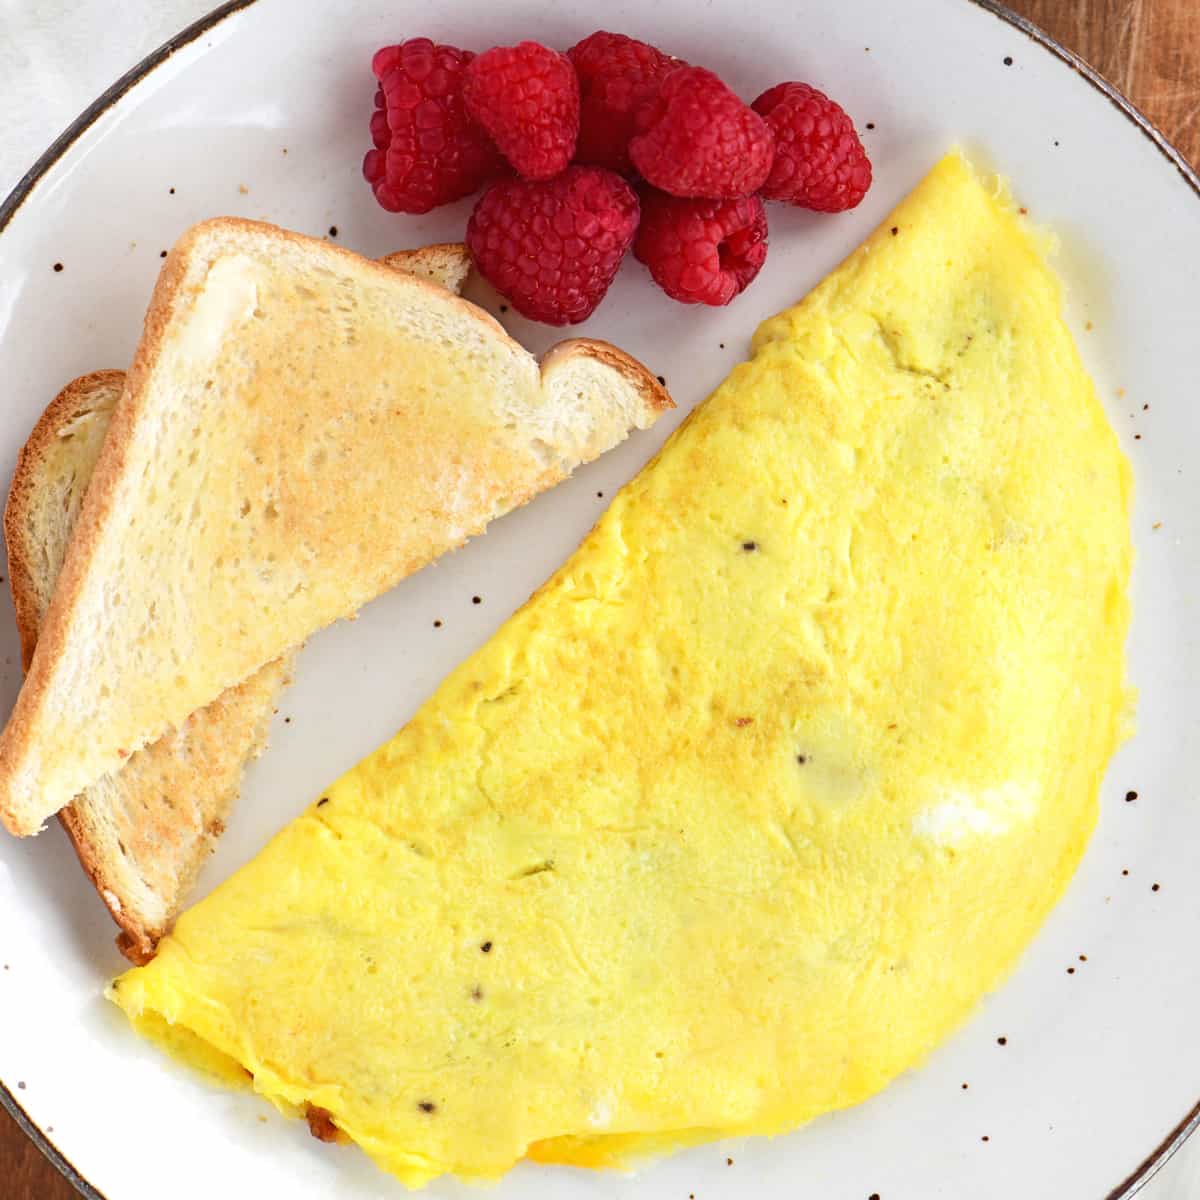 https://www.thegunnysack.com/wp-content/uploads/2023/04/How-To-Make-An-Omelet-Top-Down-SQ.jpg